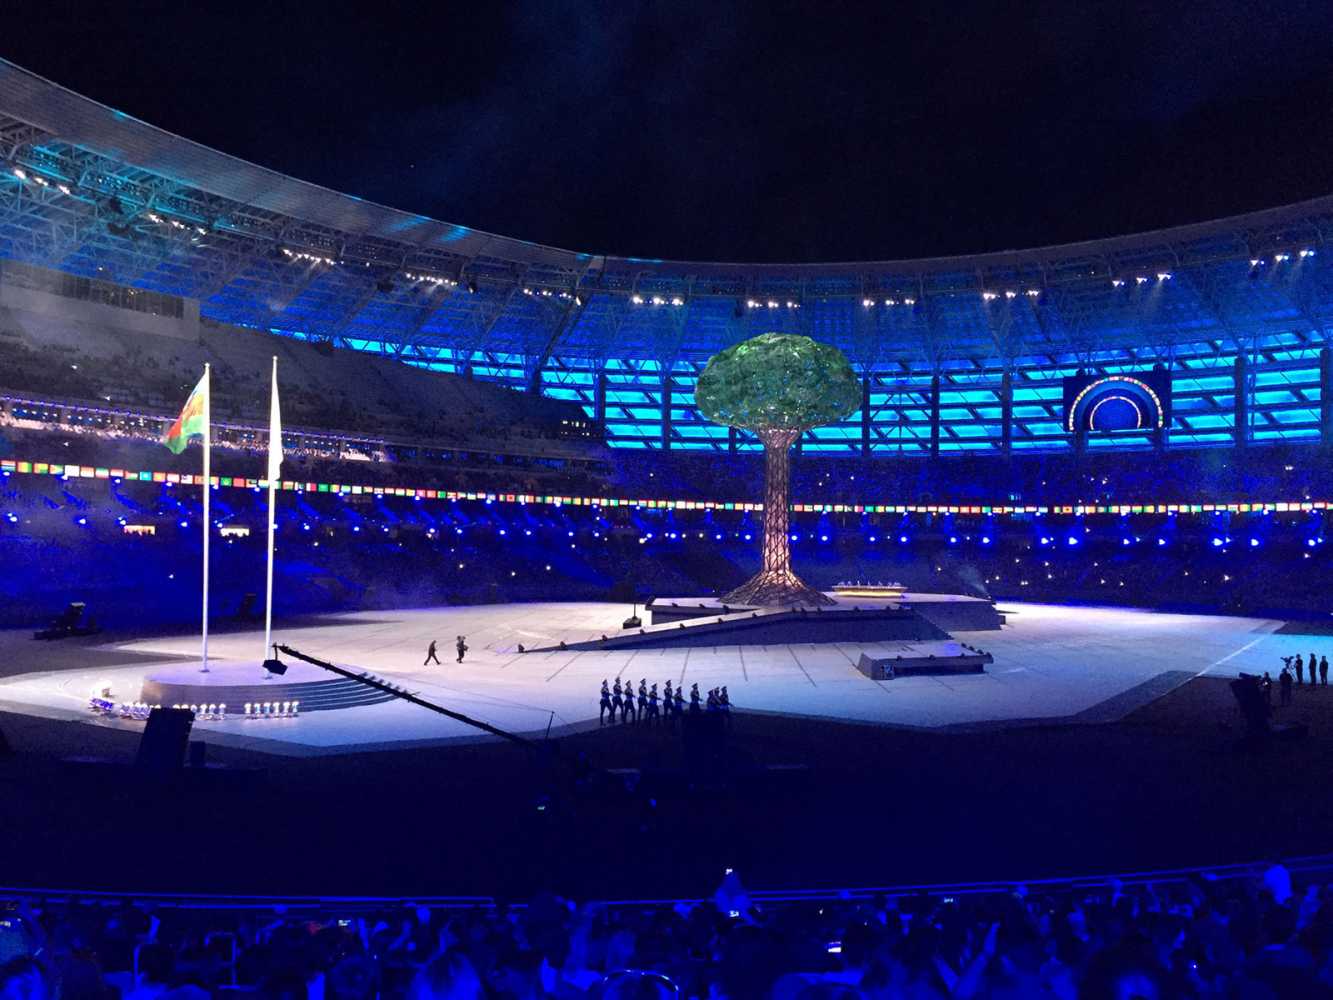 The fourth Islamic Solidarity Games, a multi-national, multi-sport event staged, were staged in Baku, Azerbaijan